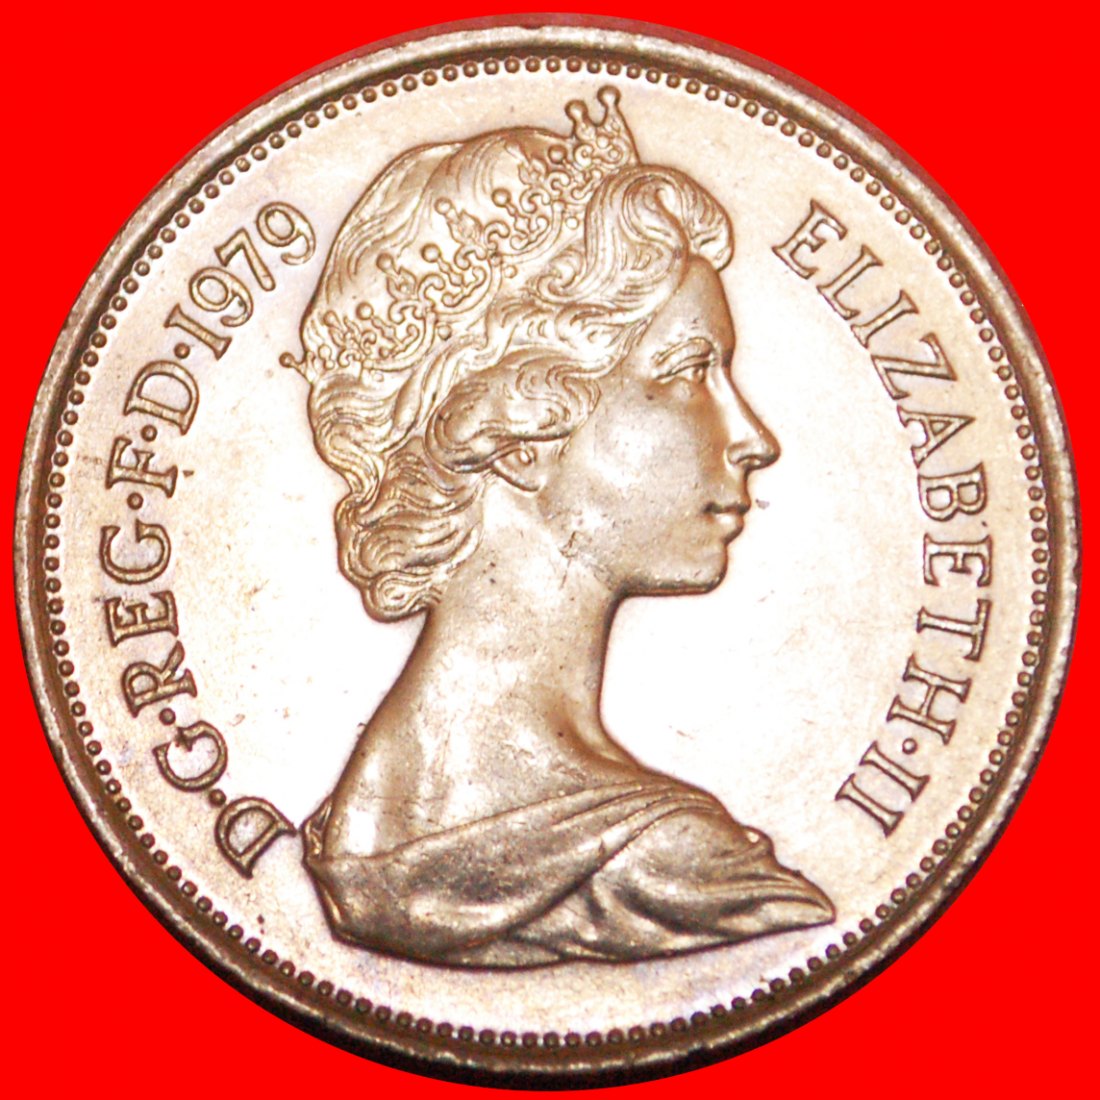  • LION (1968-1981): GREAT BRITAIN ★ 10 NEW PENCE 1979 MINT LUSTER! LOW START ★ NO RESERVE!   